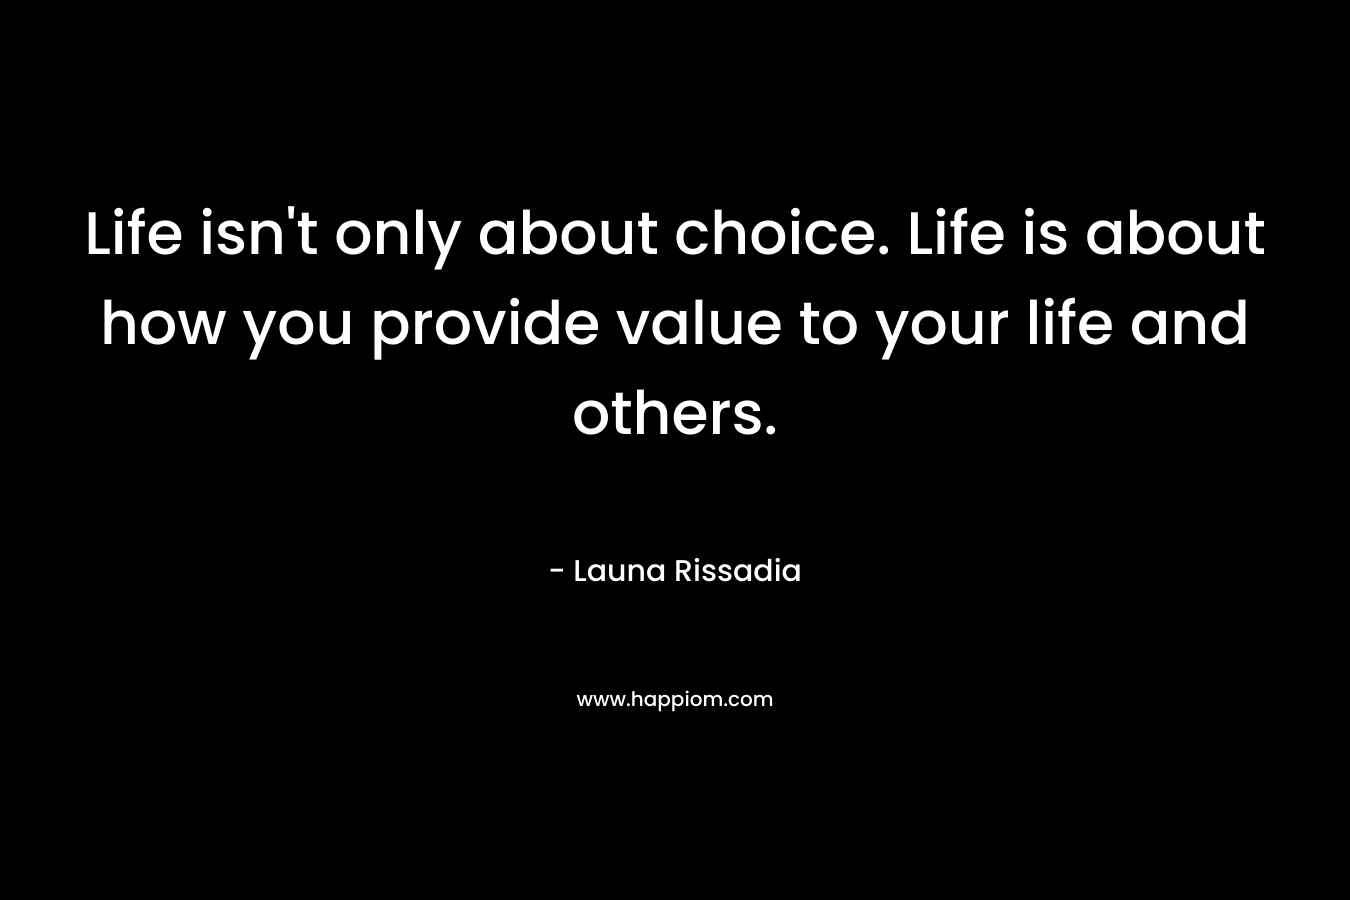 Life isn't only about choice. Life is about how you provide value to your life and others.